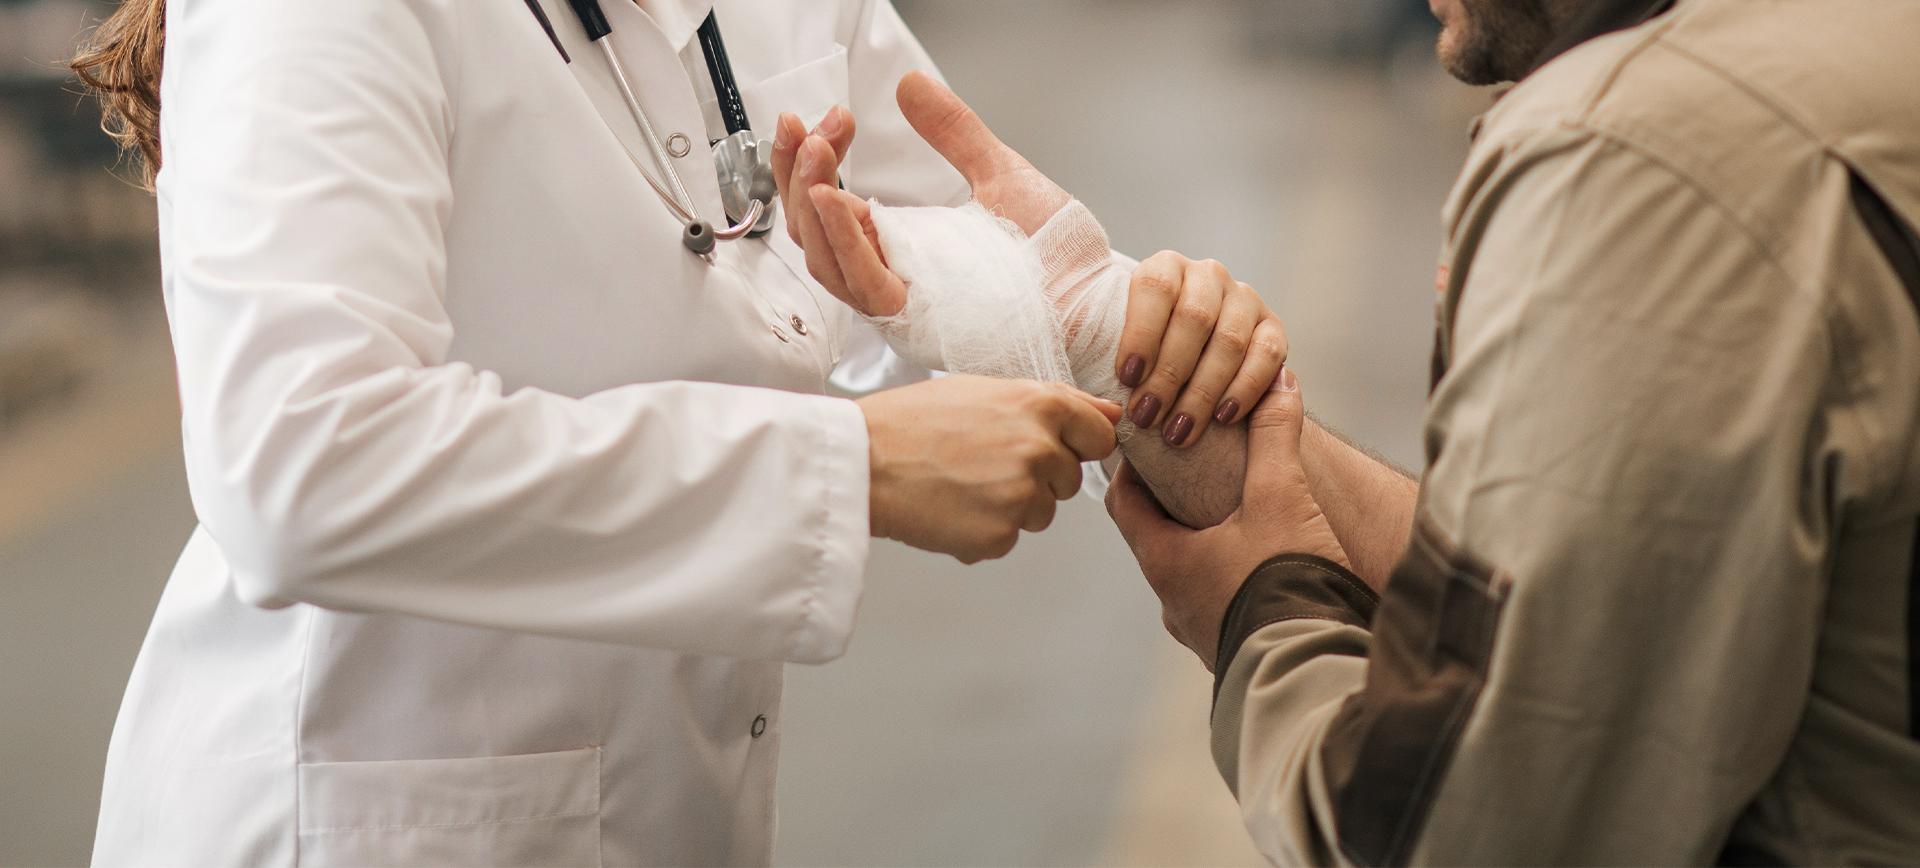 doctor wrapping injured patient's hand in a warehouse